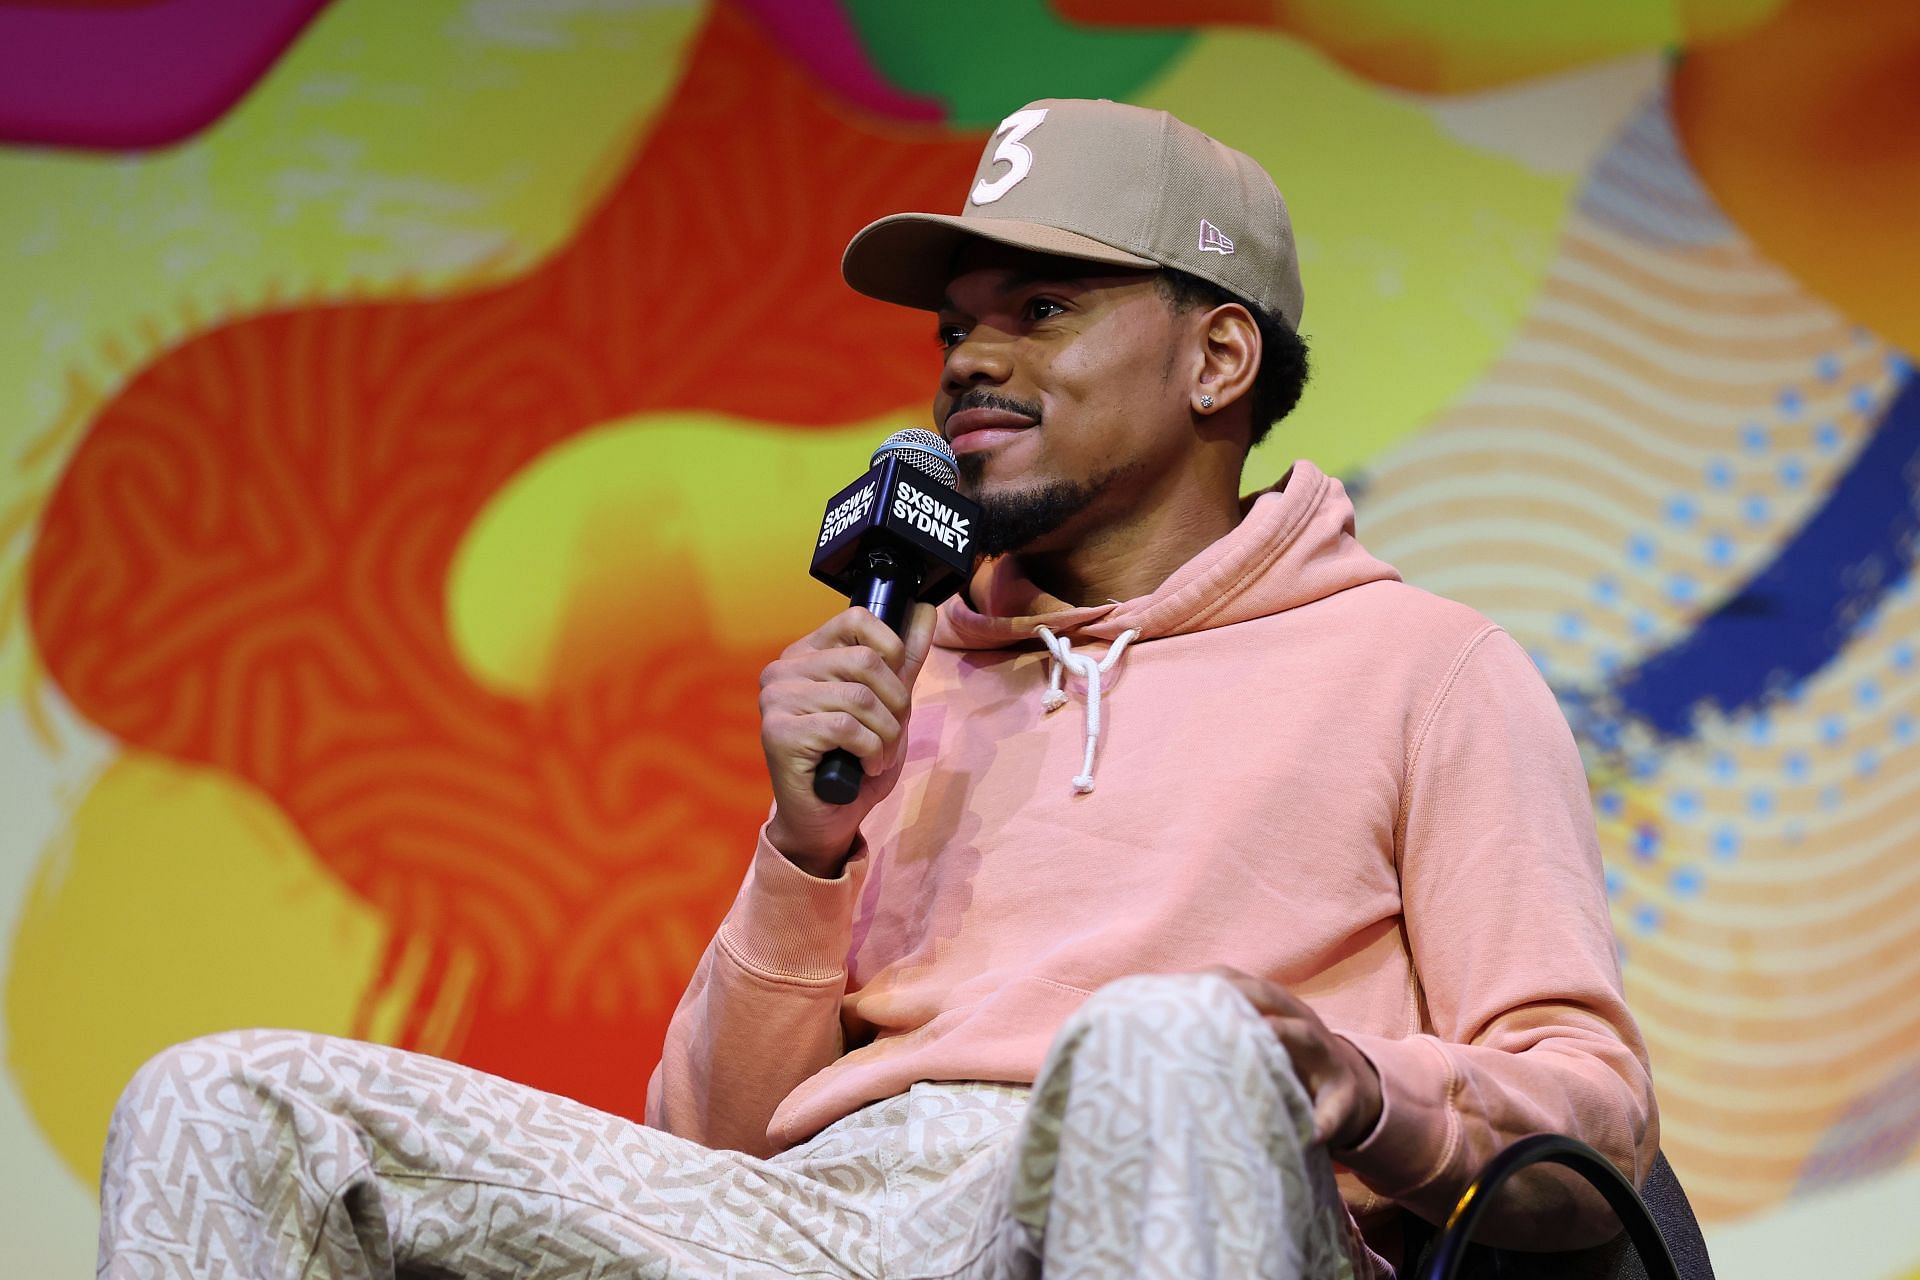 50th Anniversary Of Hip Hop Featuring Chance The Rapper - SXSW Sydney